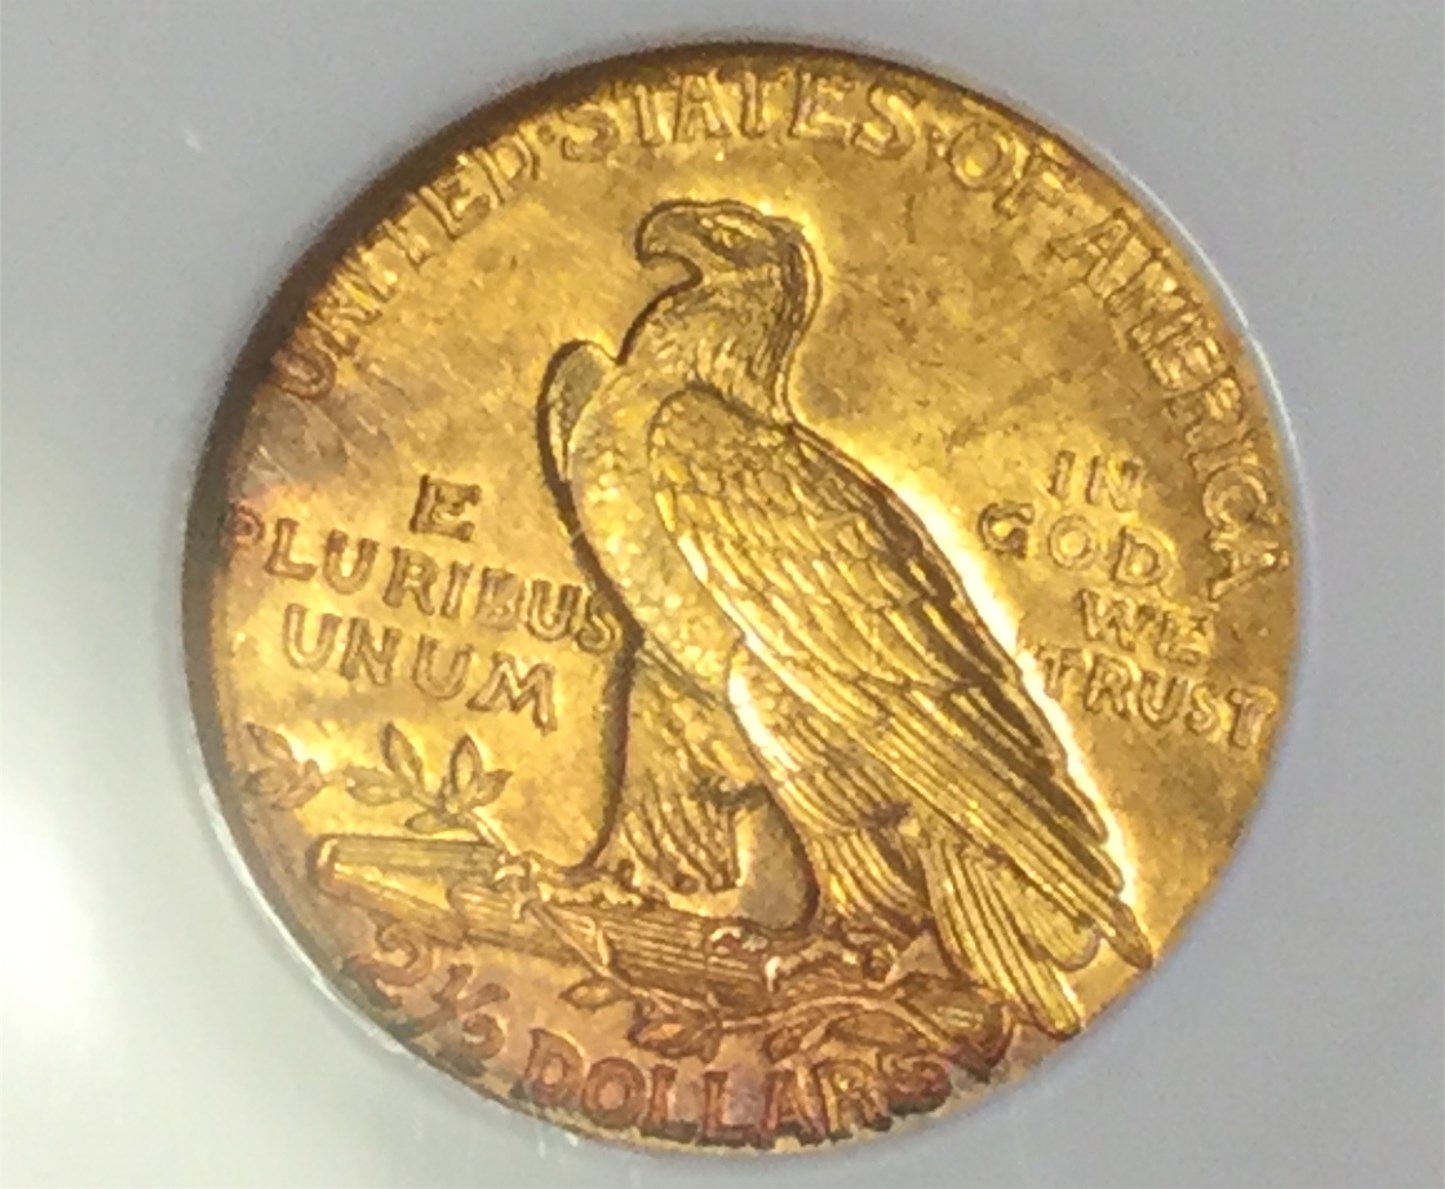 Two new toned gold coins | Coin Talk